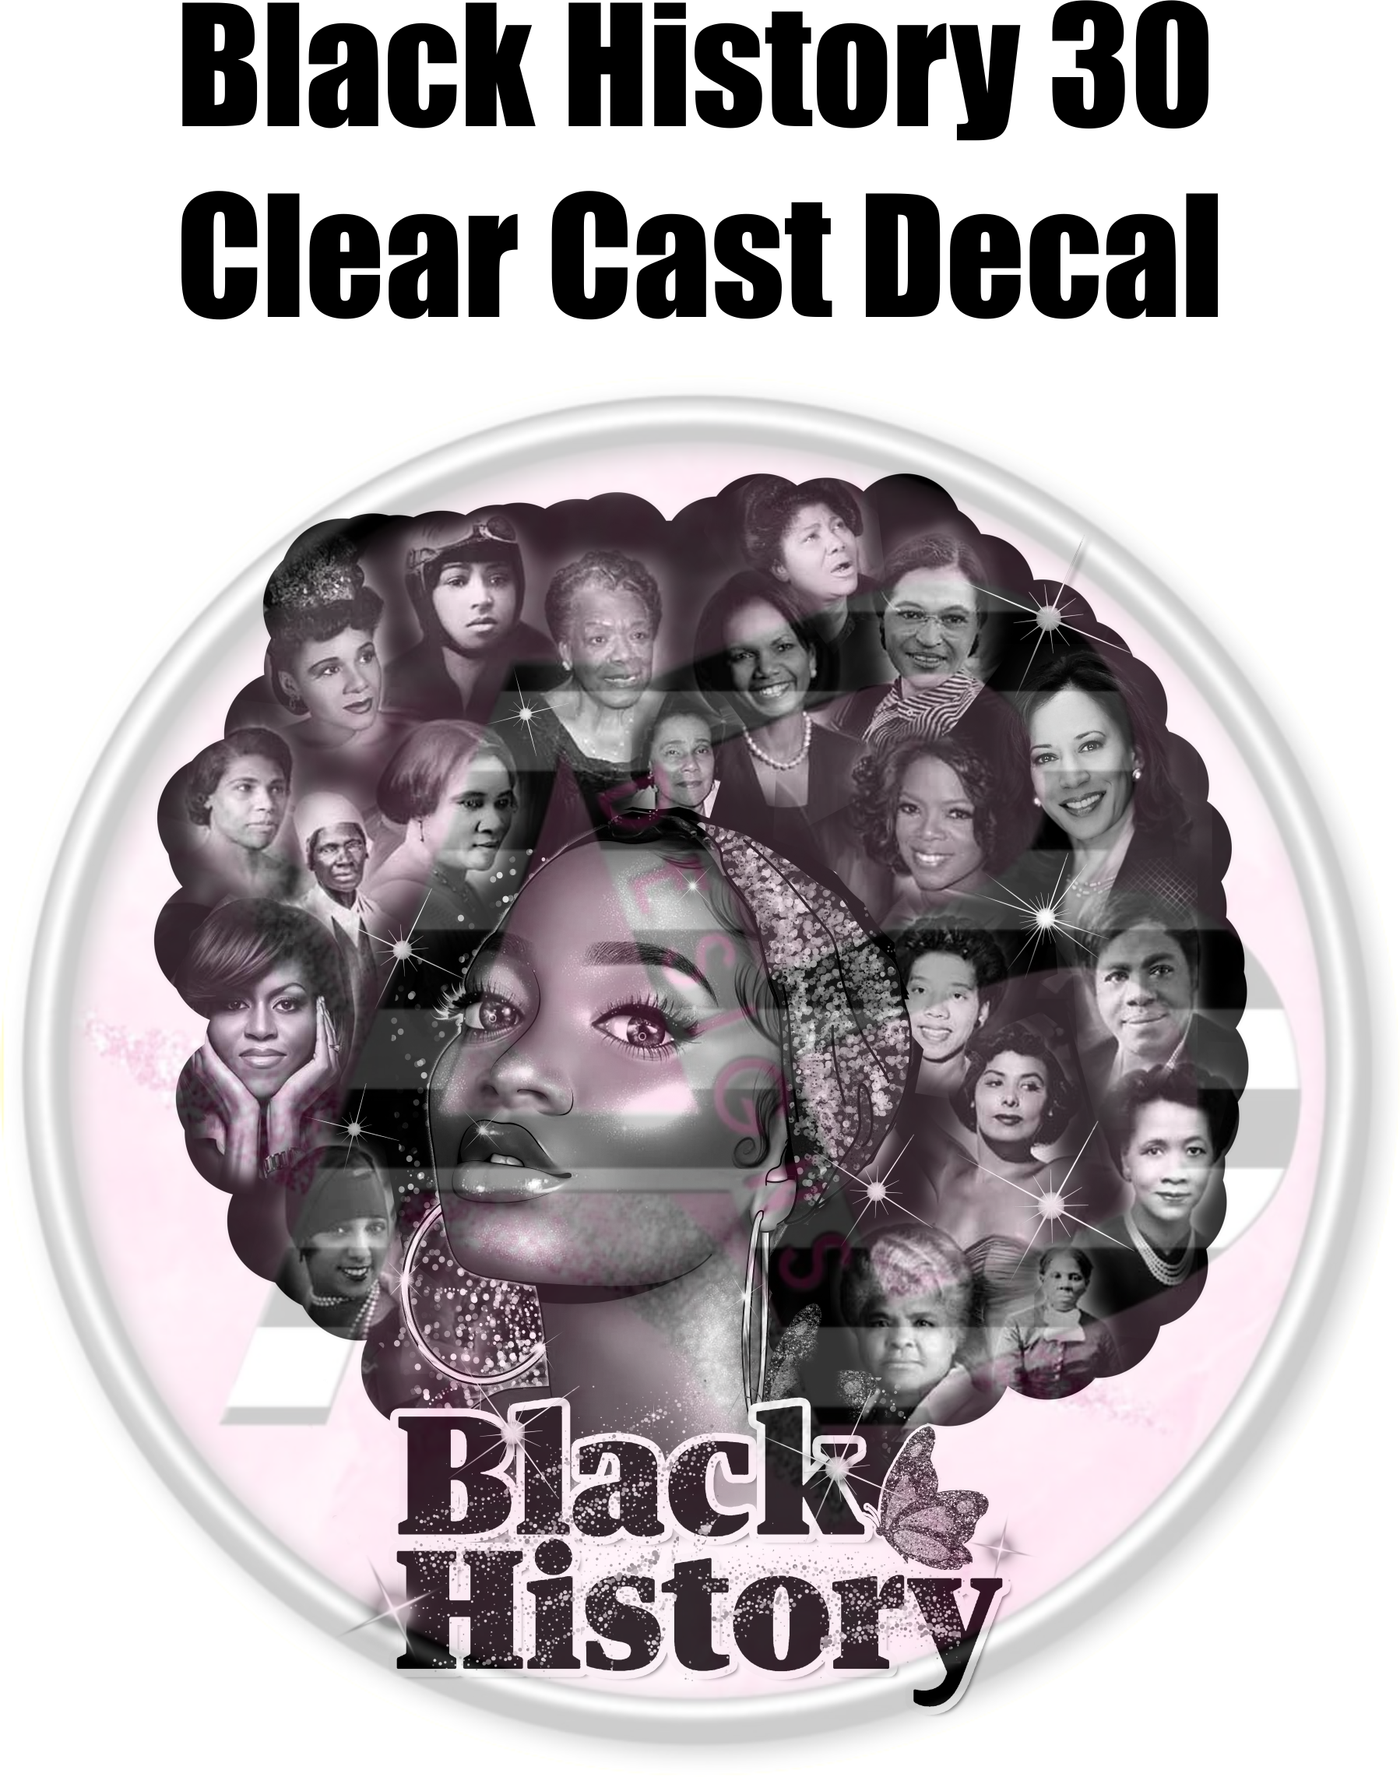 Black History 30 - Clear Cast Decal